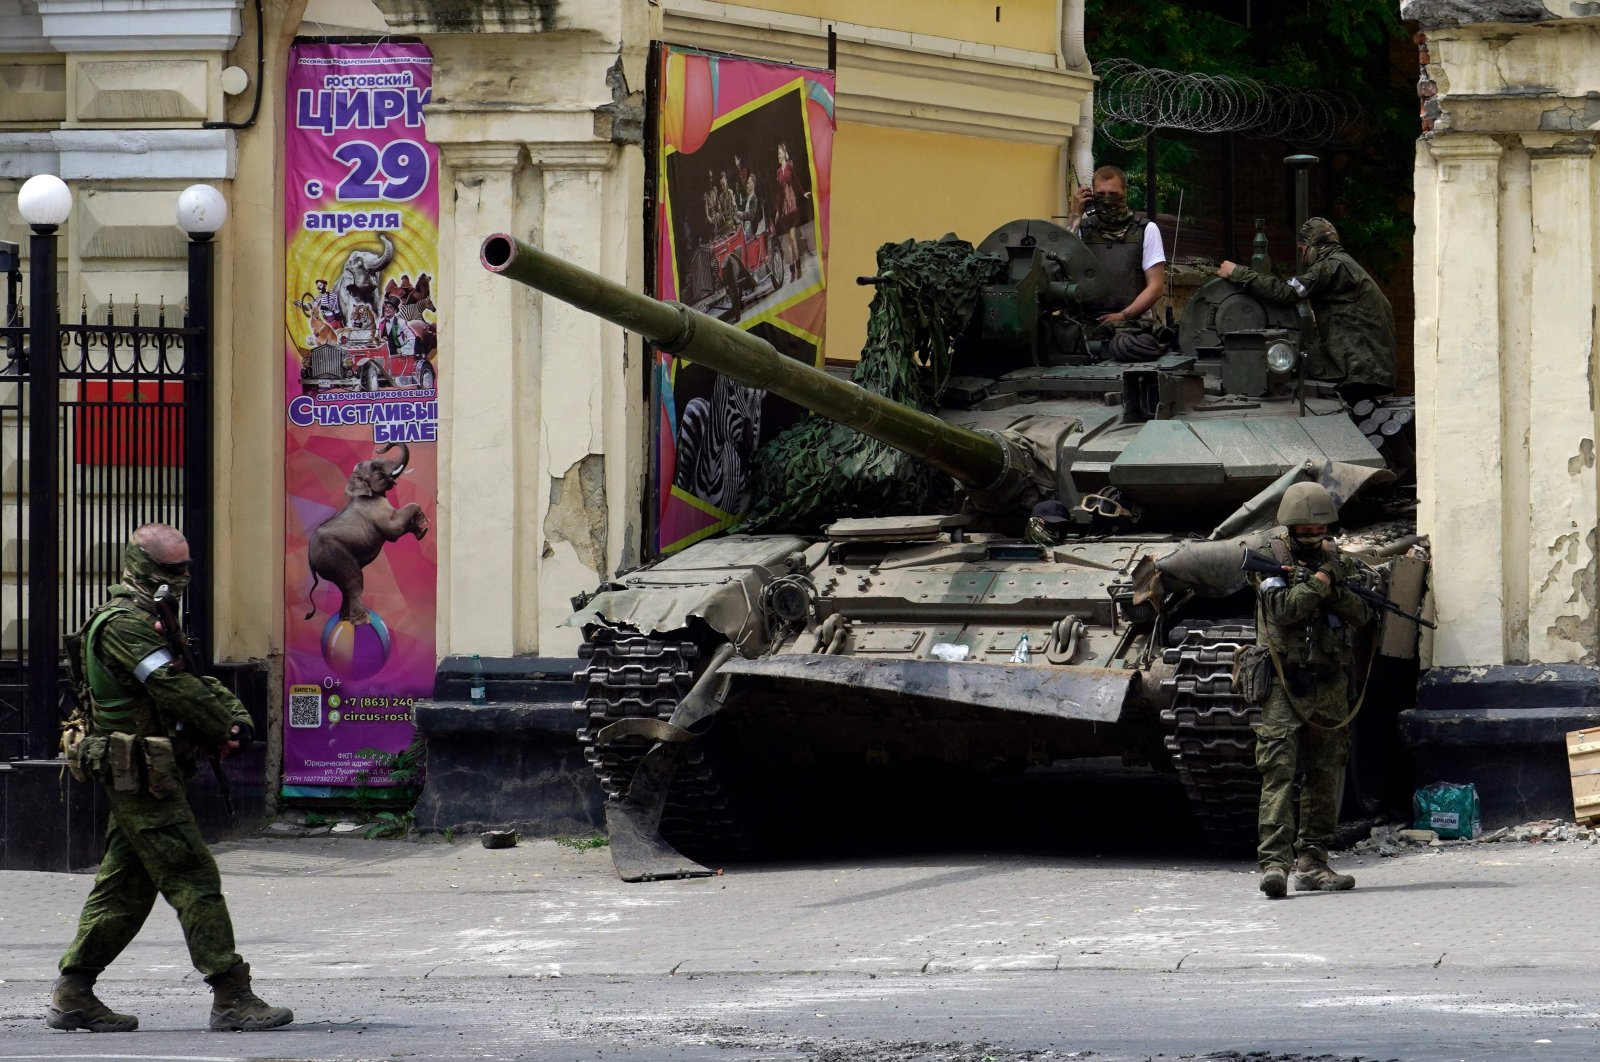 Members of Wagner group patrol in an area near a tank outside a circus building in the city of Rostov-on-Don, Russia, June 24, 2023. (AFP Photo)